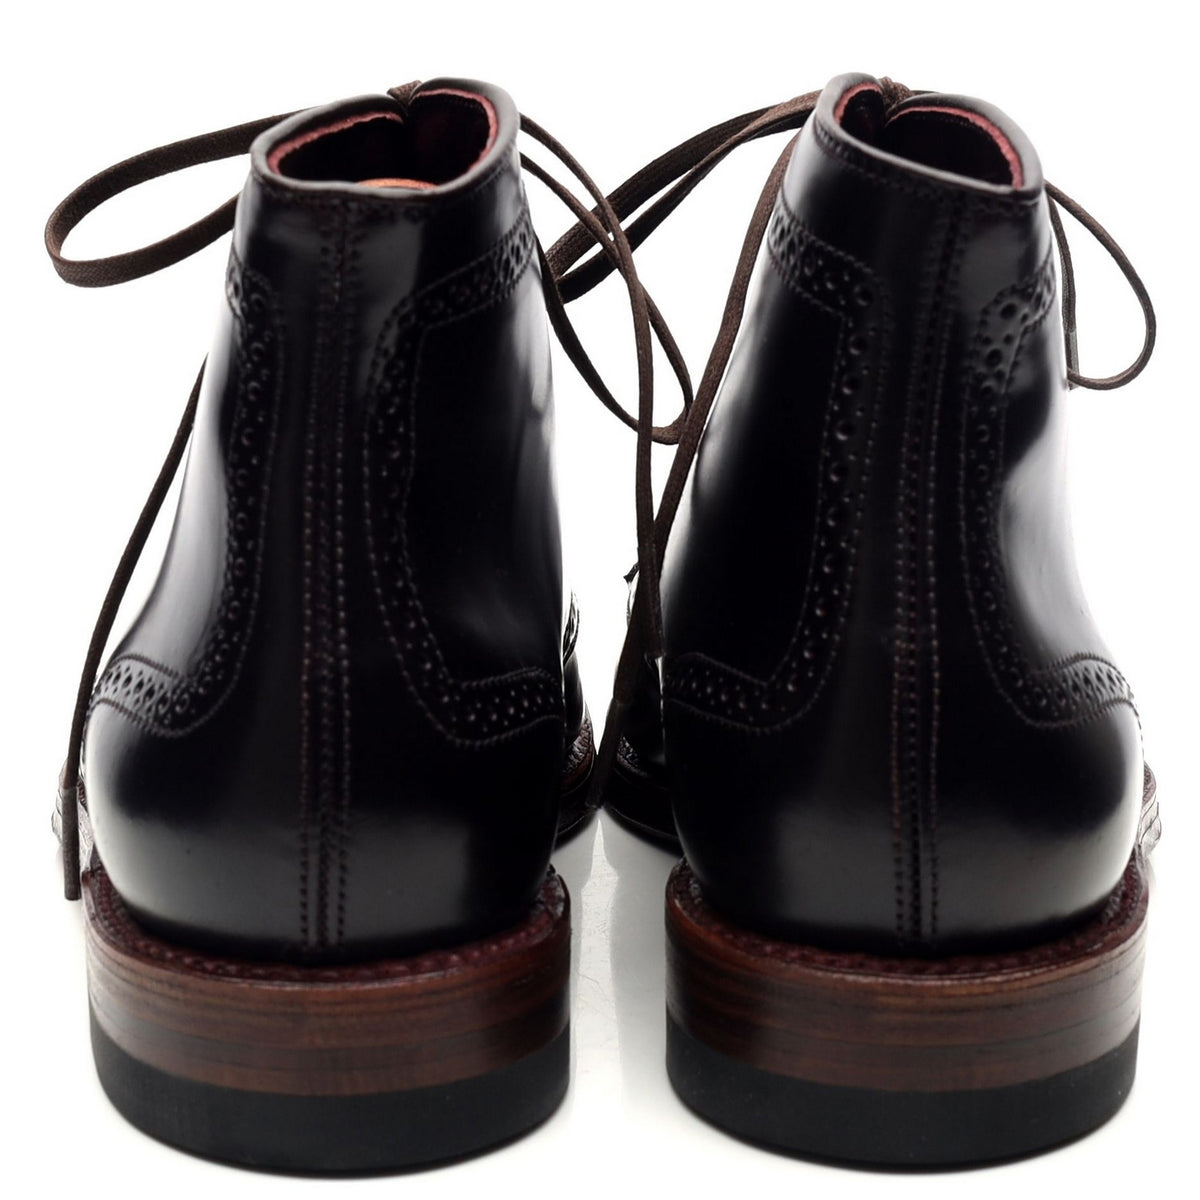 &#39;D9842H&#39; Burgundy Cordovan Leather Boots UK 6.5 US 7 E